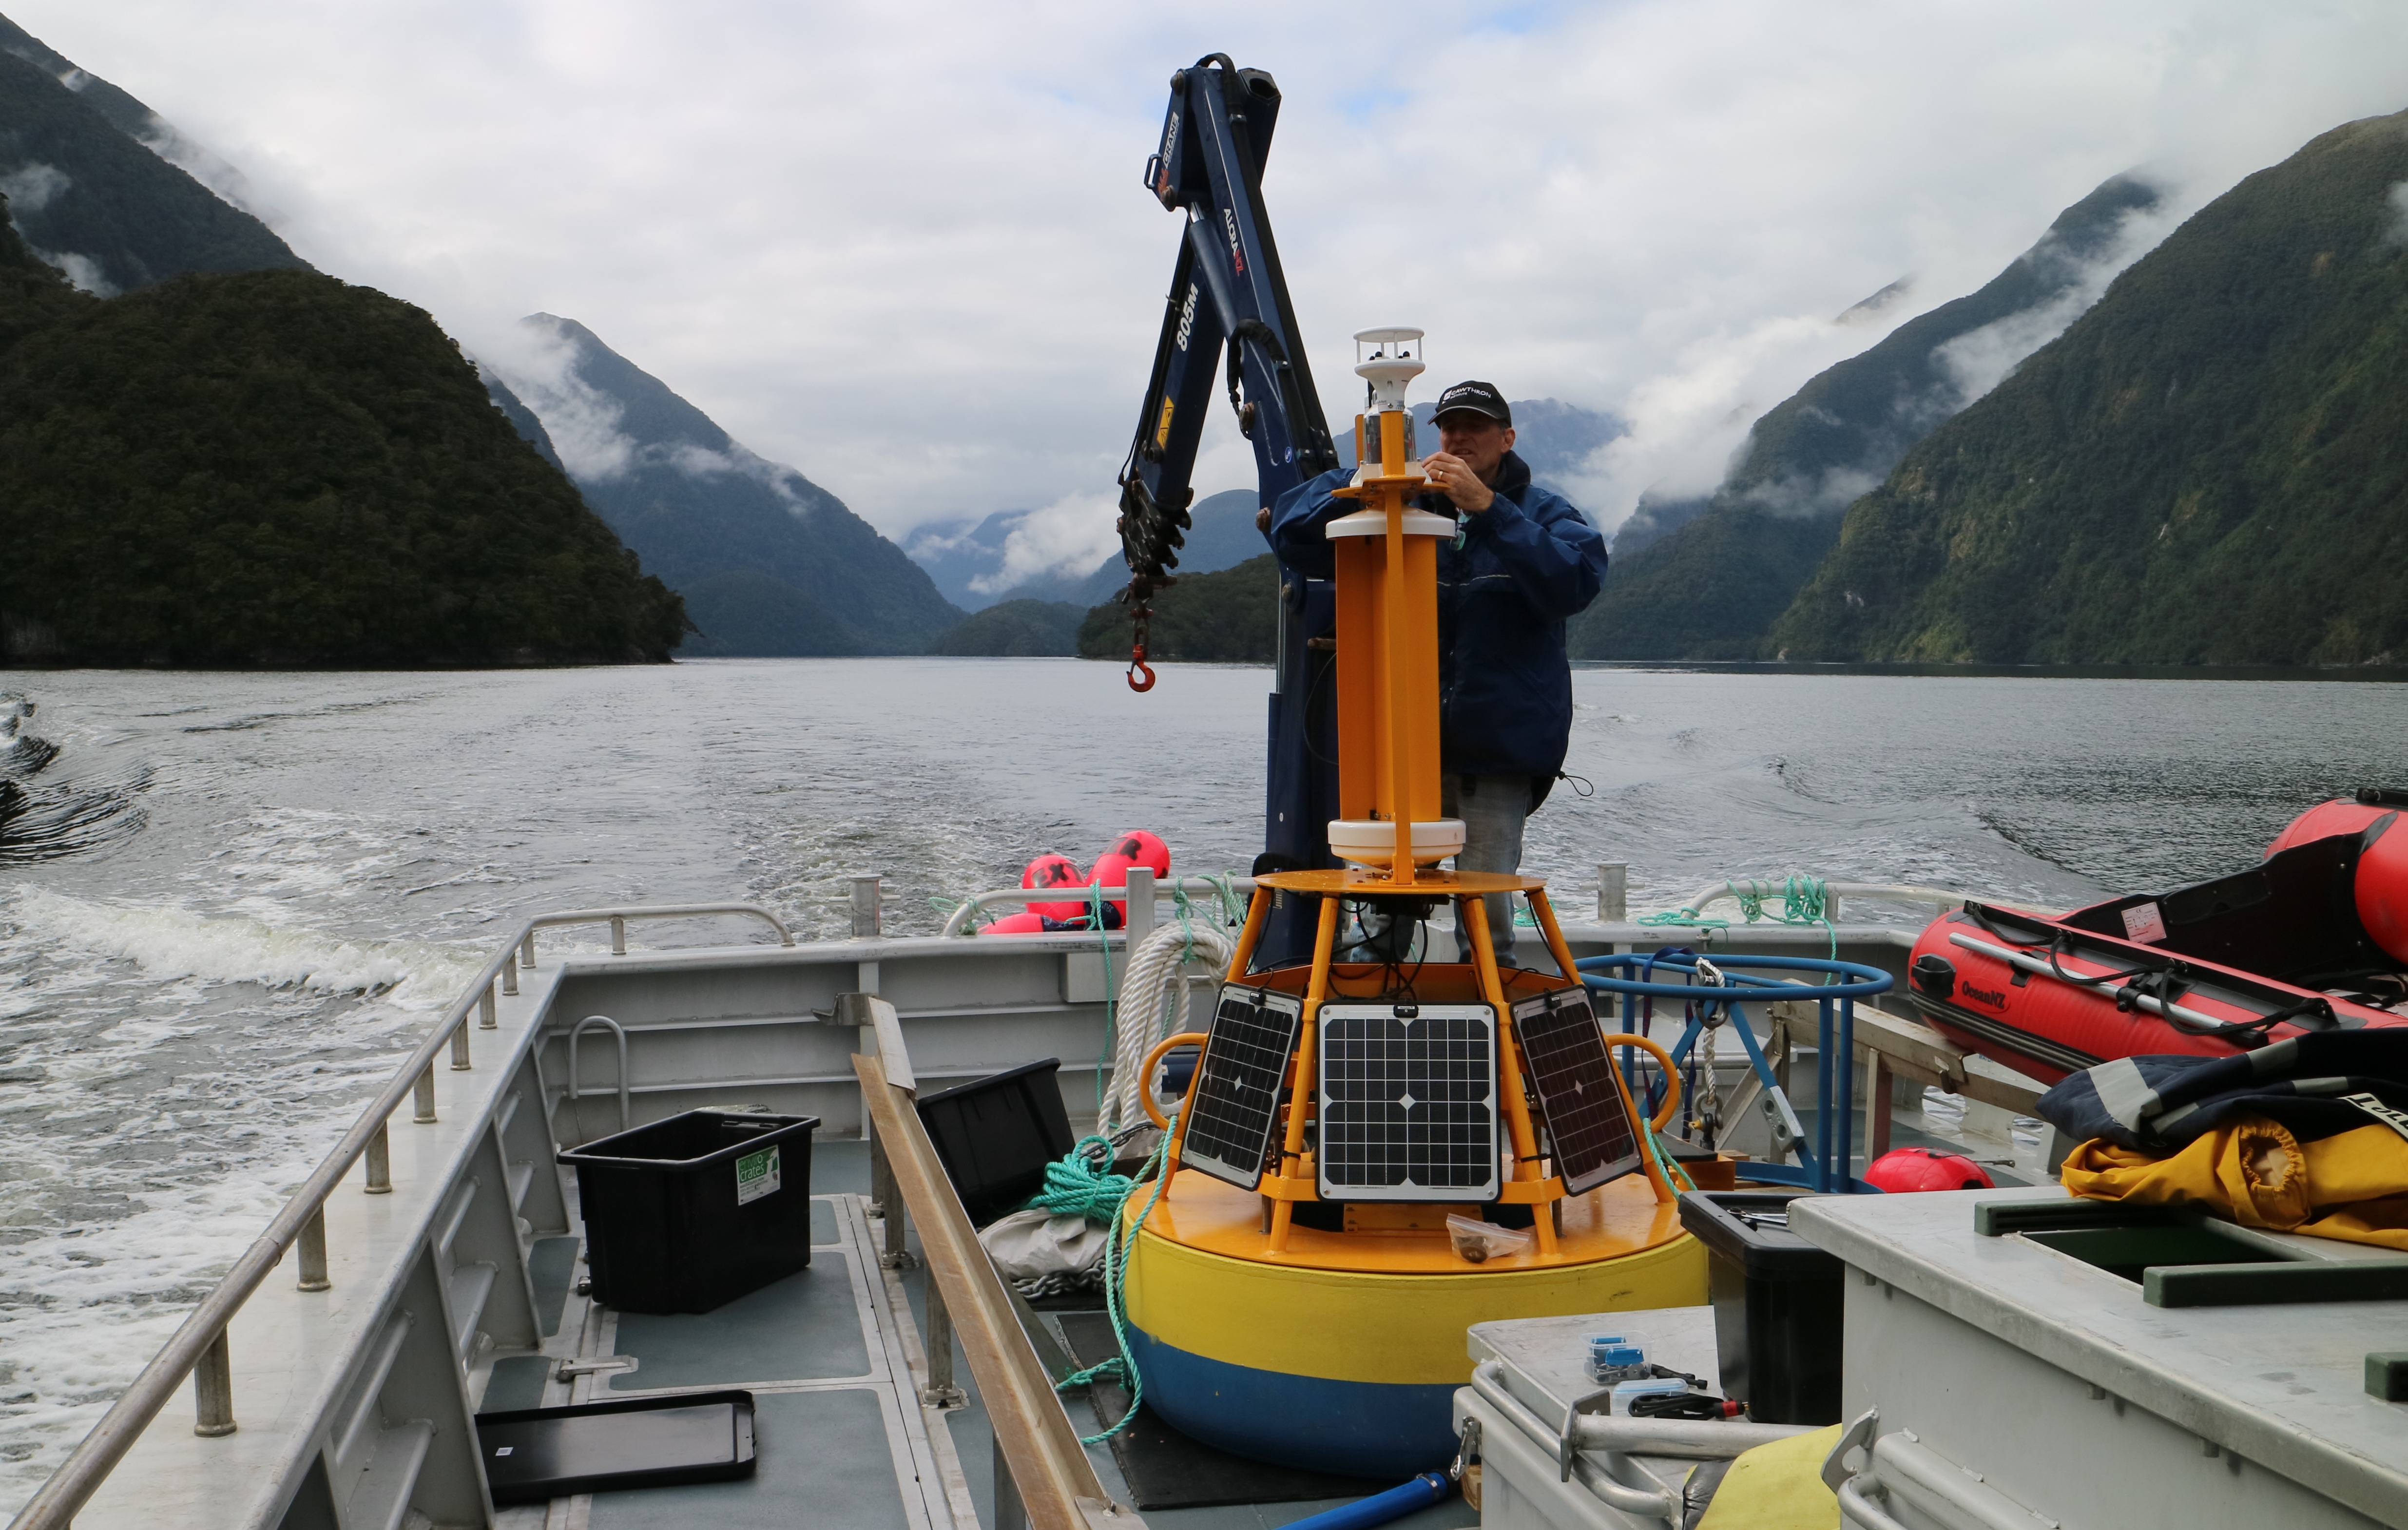 Cawthron Institute scientist Paul Barter deploying an upgraded Cawthron-designed wind and solar powered monitoring buoy in Milford Sound, Aotearoa New Zealand. Image courtesy of Cawthron Institute.